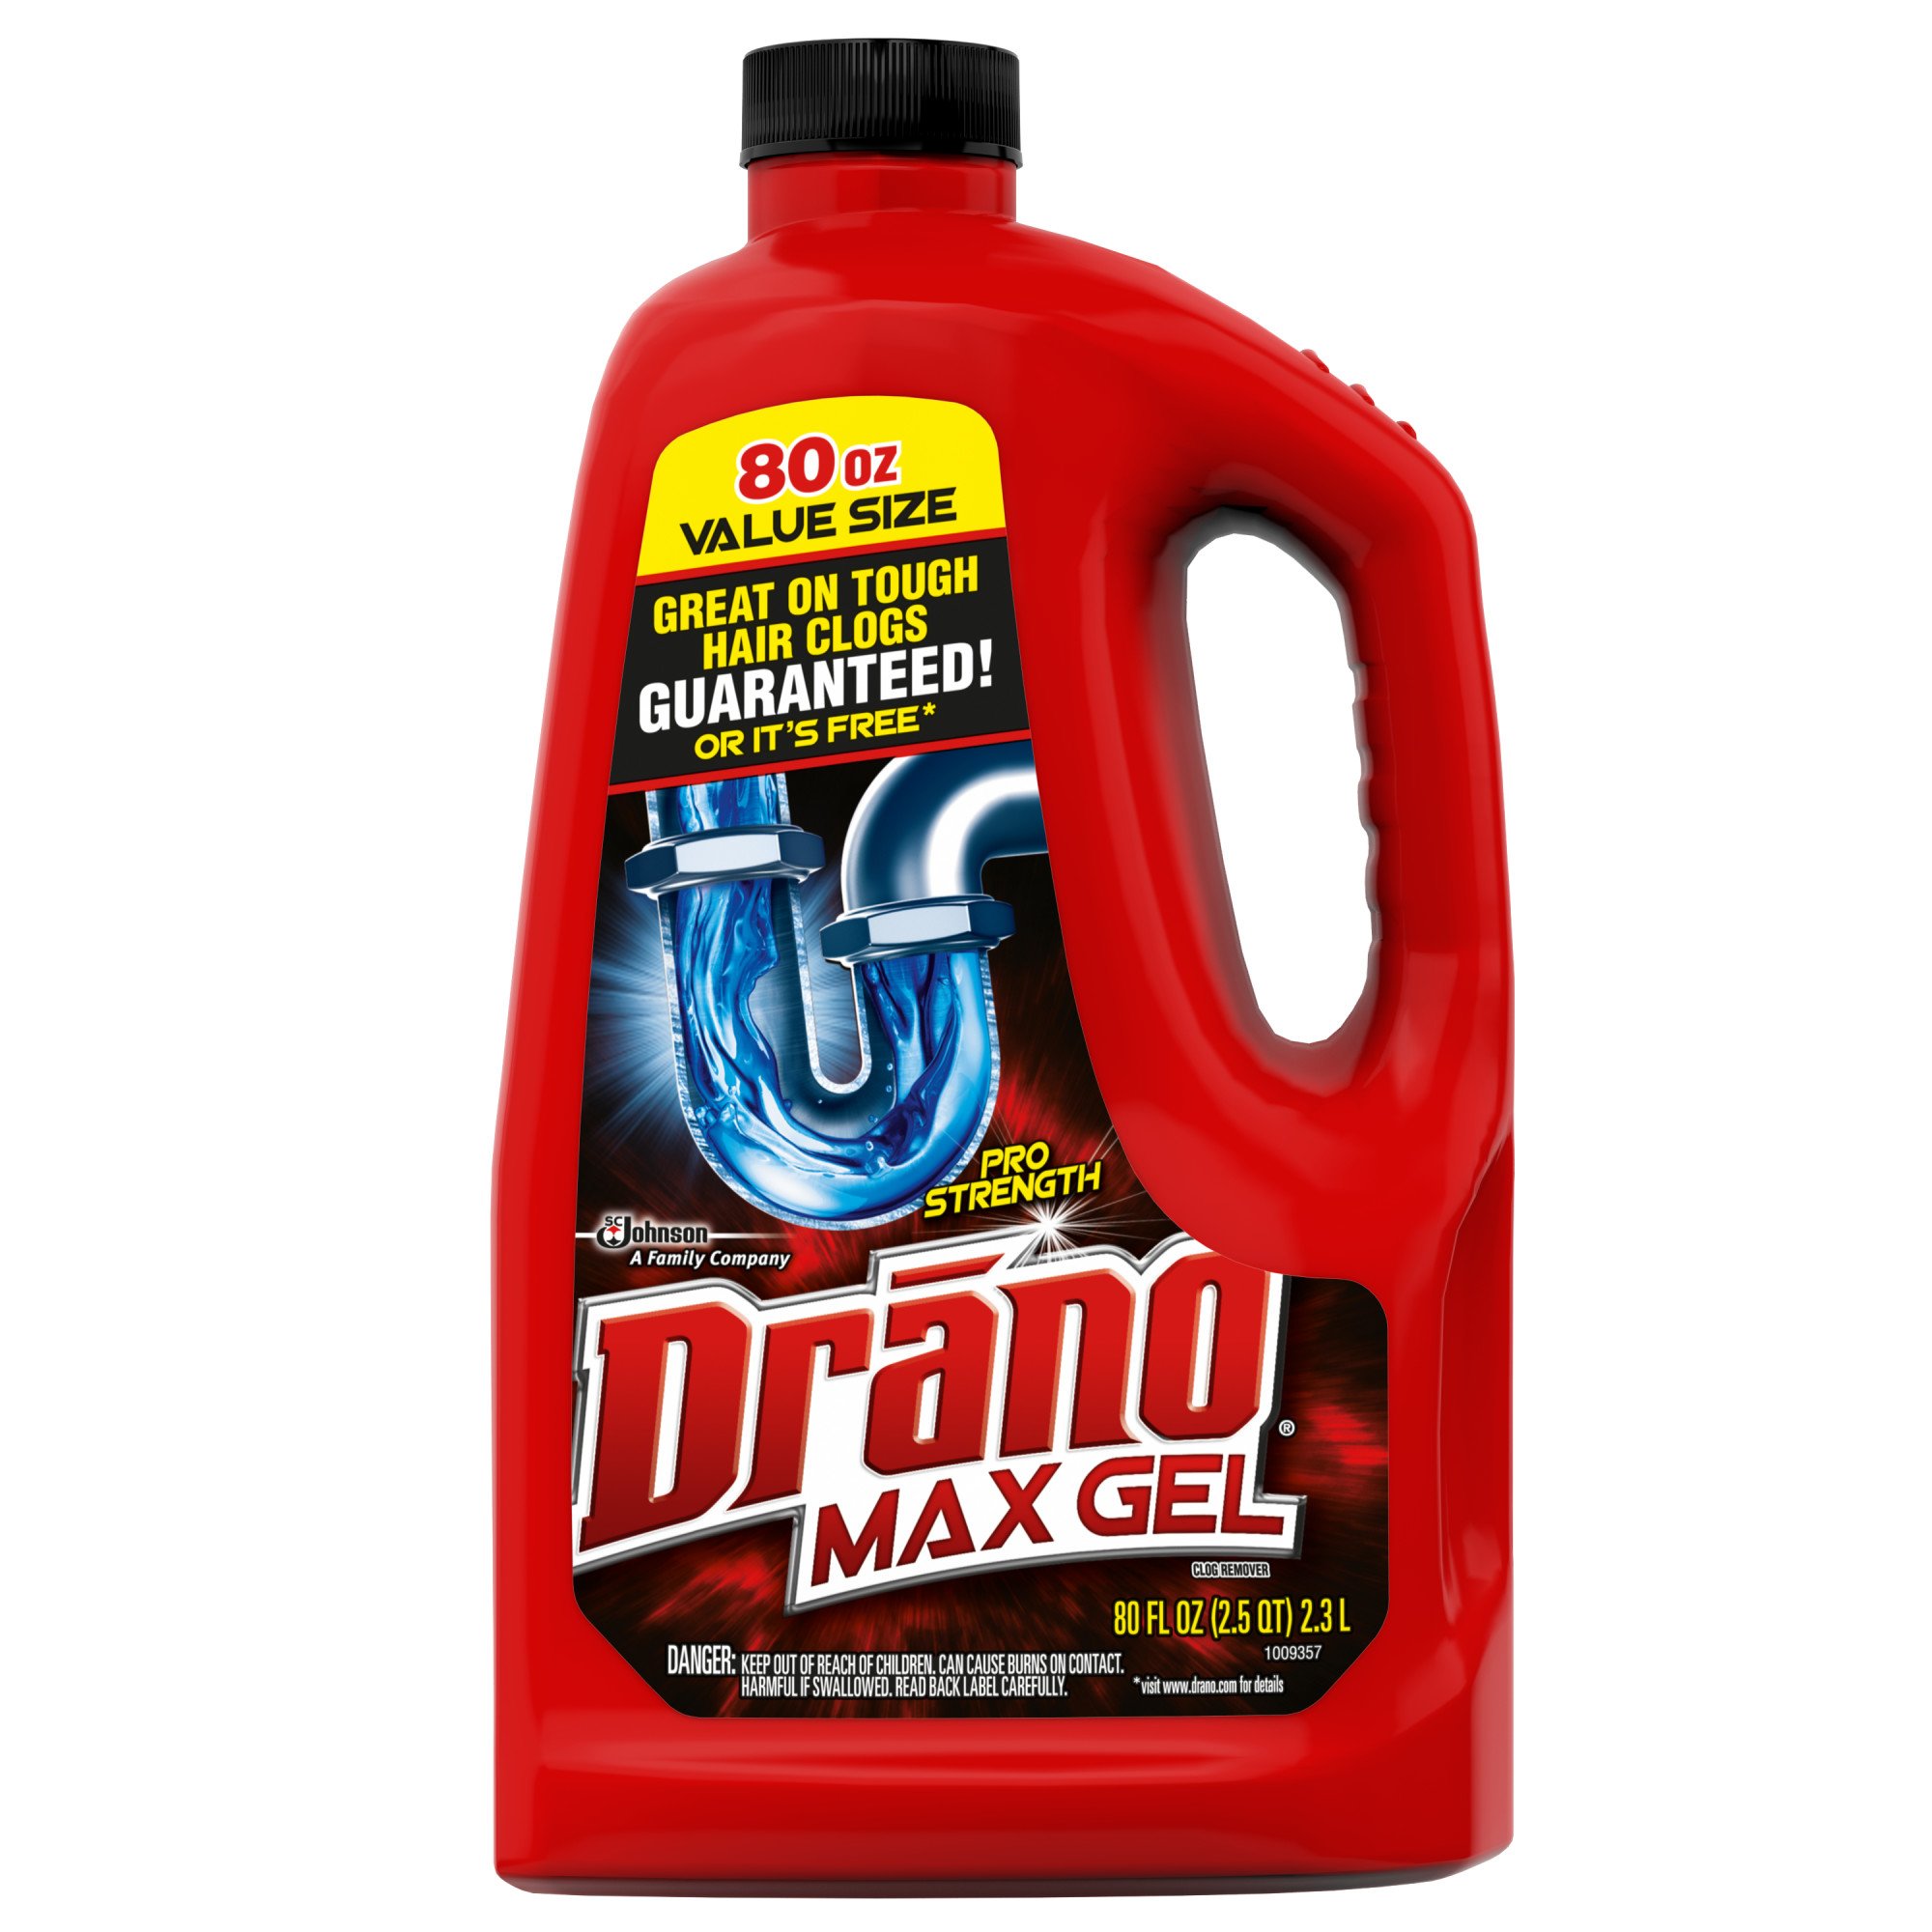 Drano Pro Strength Clog Remover Max Gel - Shop Drain Cleaners at H-E-B